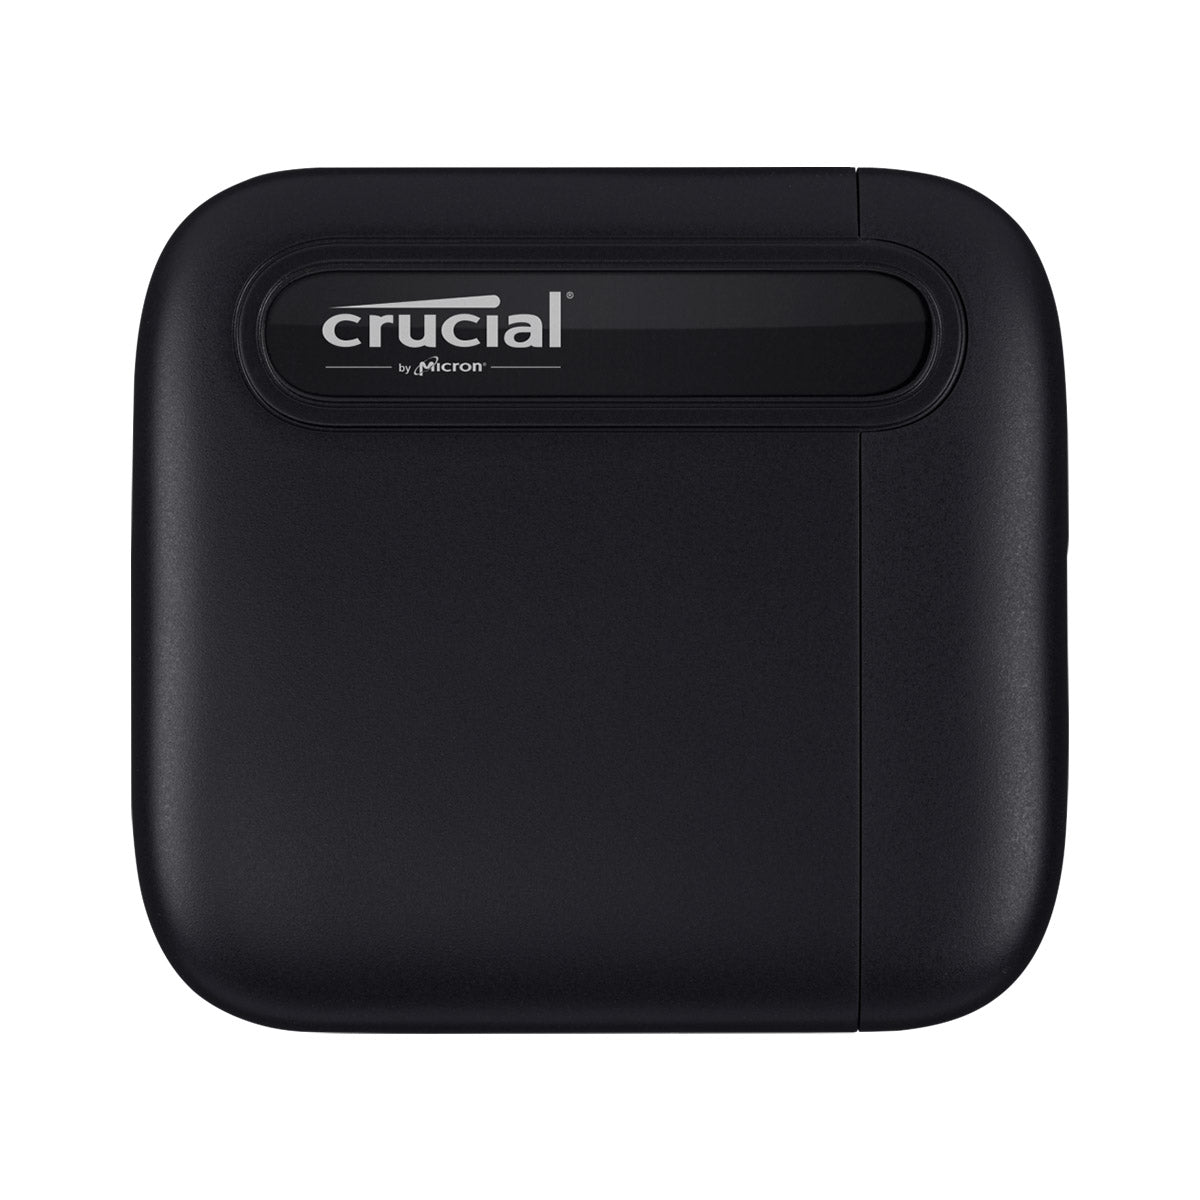 Crucial X6 1TB Portable SSD - up to 800MB/s - USB 3.2 – External Solid State Drive, USB-C - CT1000X6SSD9